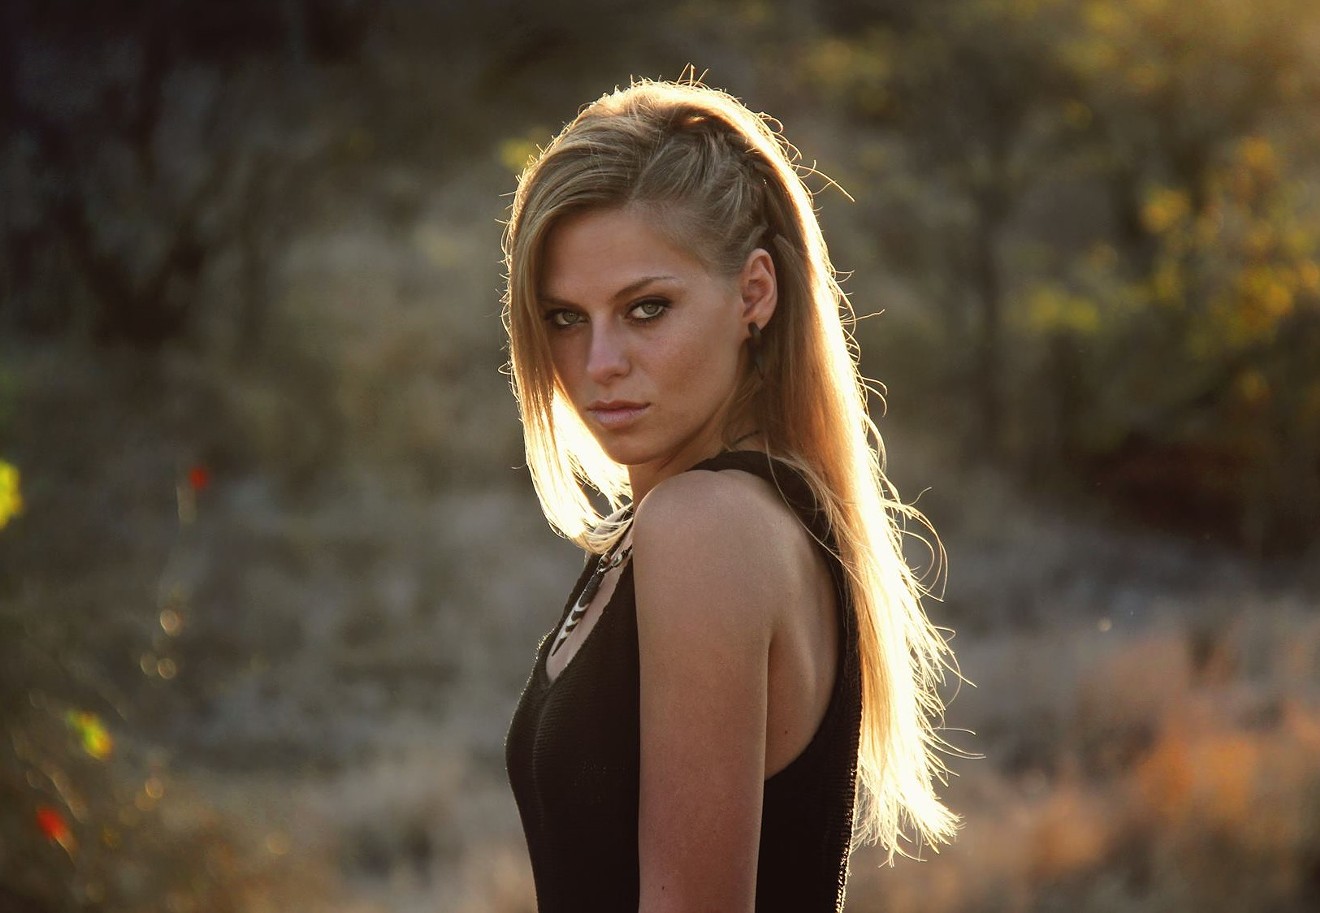 Nora en Pure is scheduled to perform on Friday, December 8, at Maya Day & Nightclub in Scottsdale.